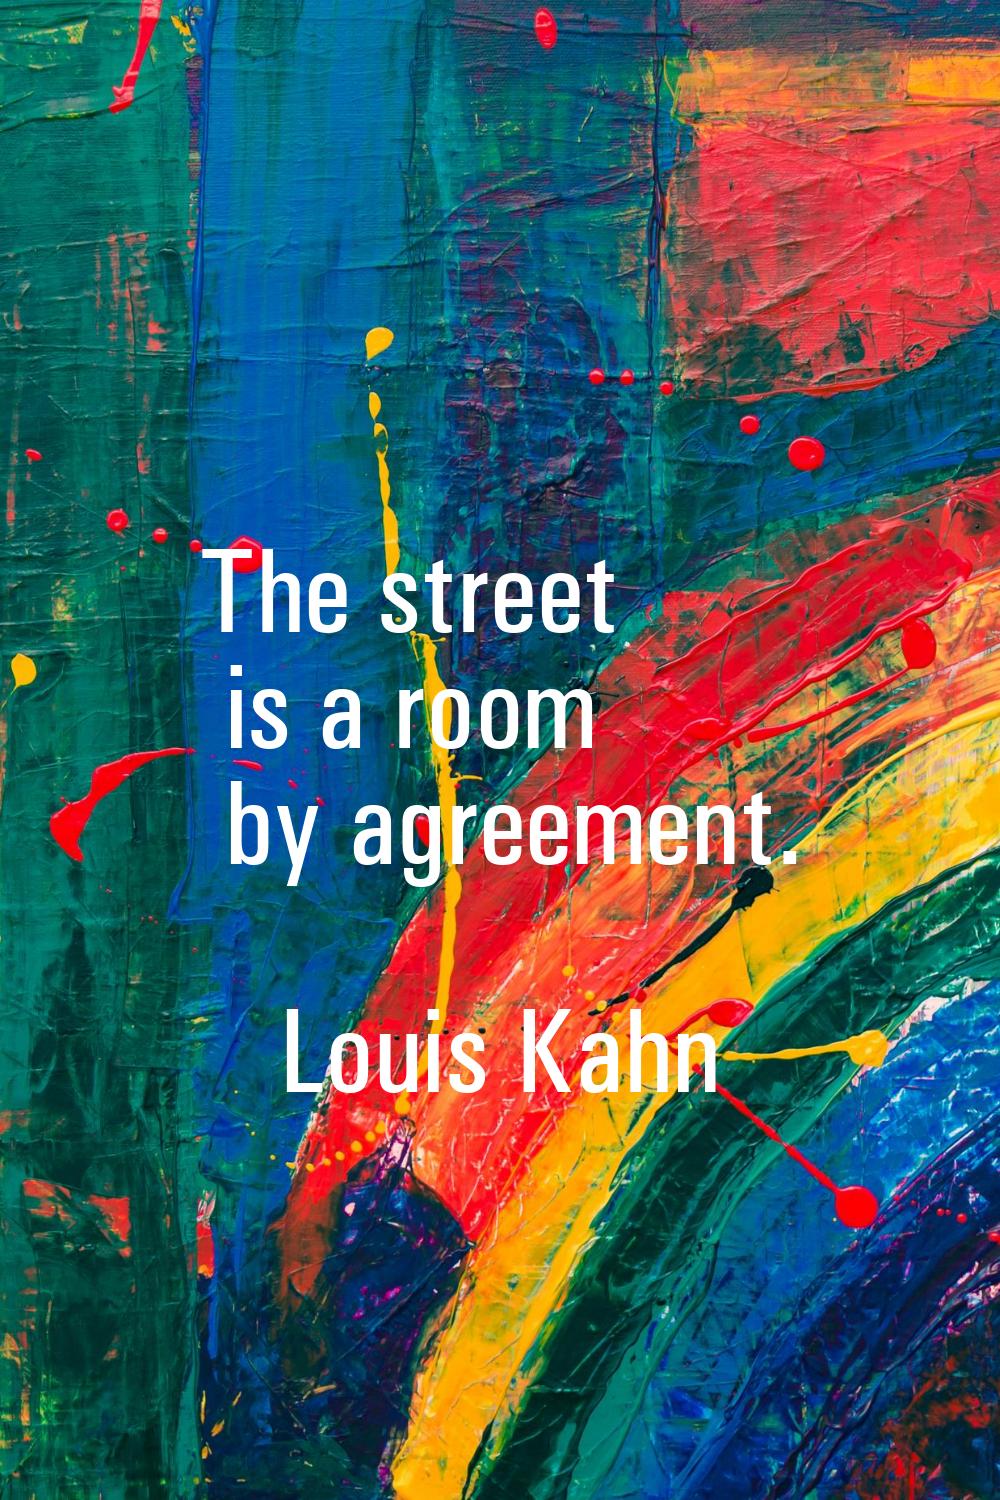 The street is a room by agreement.